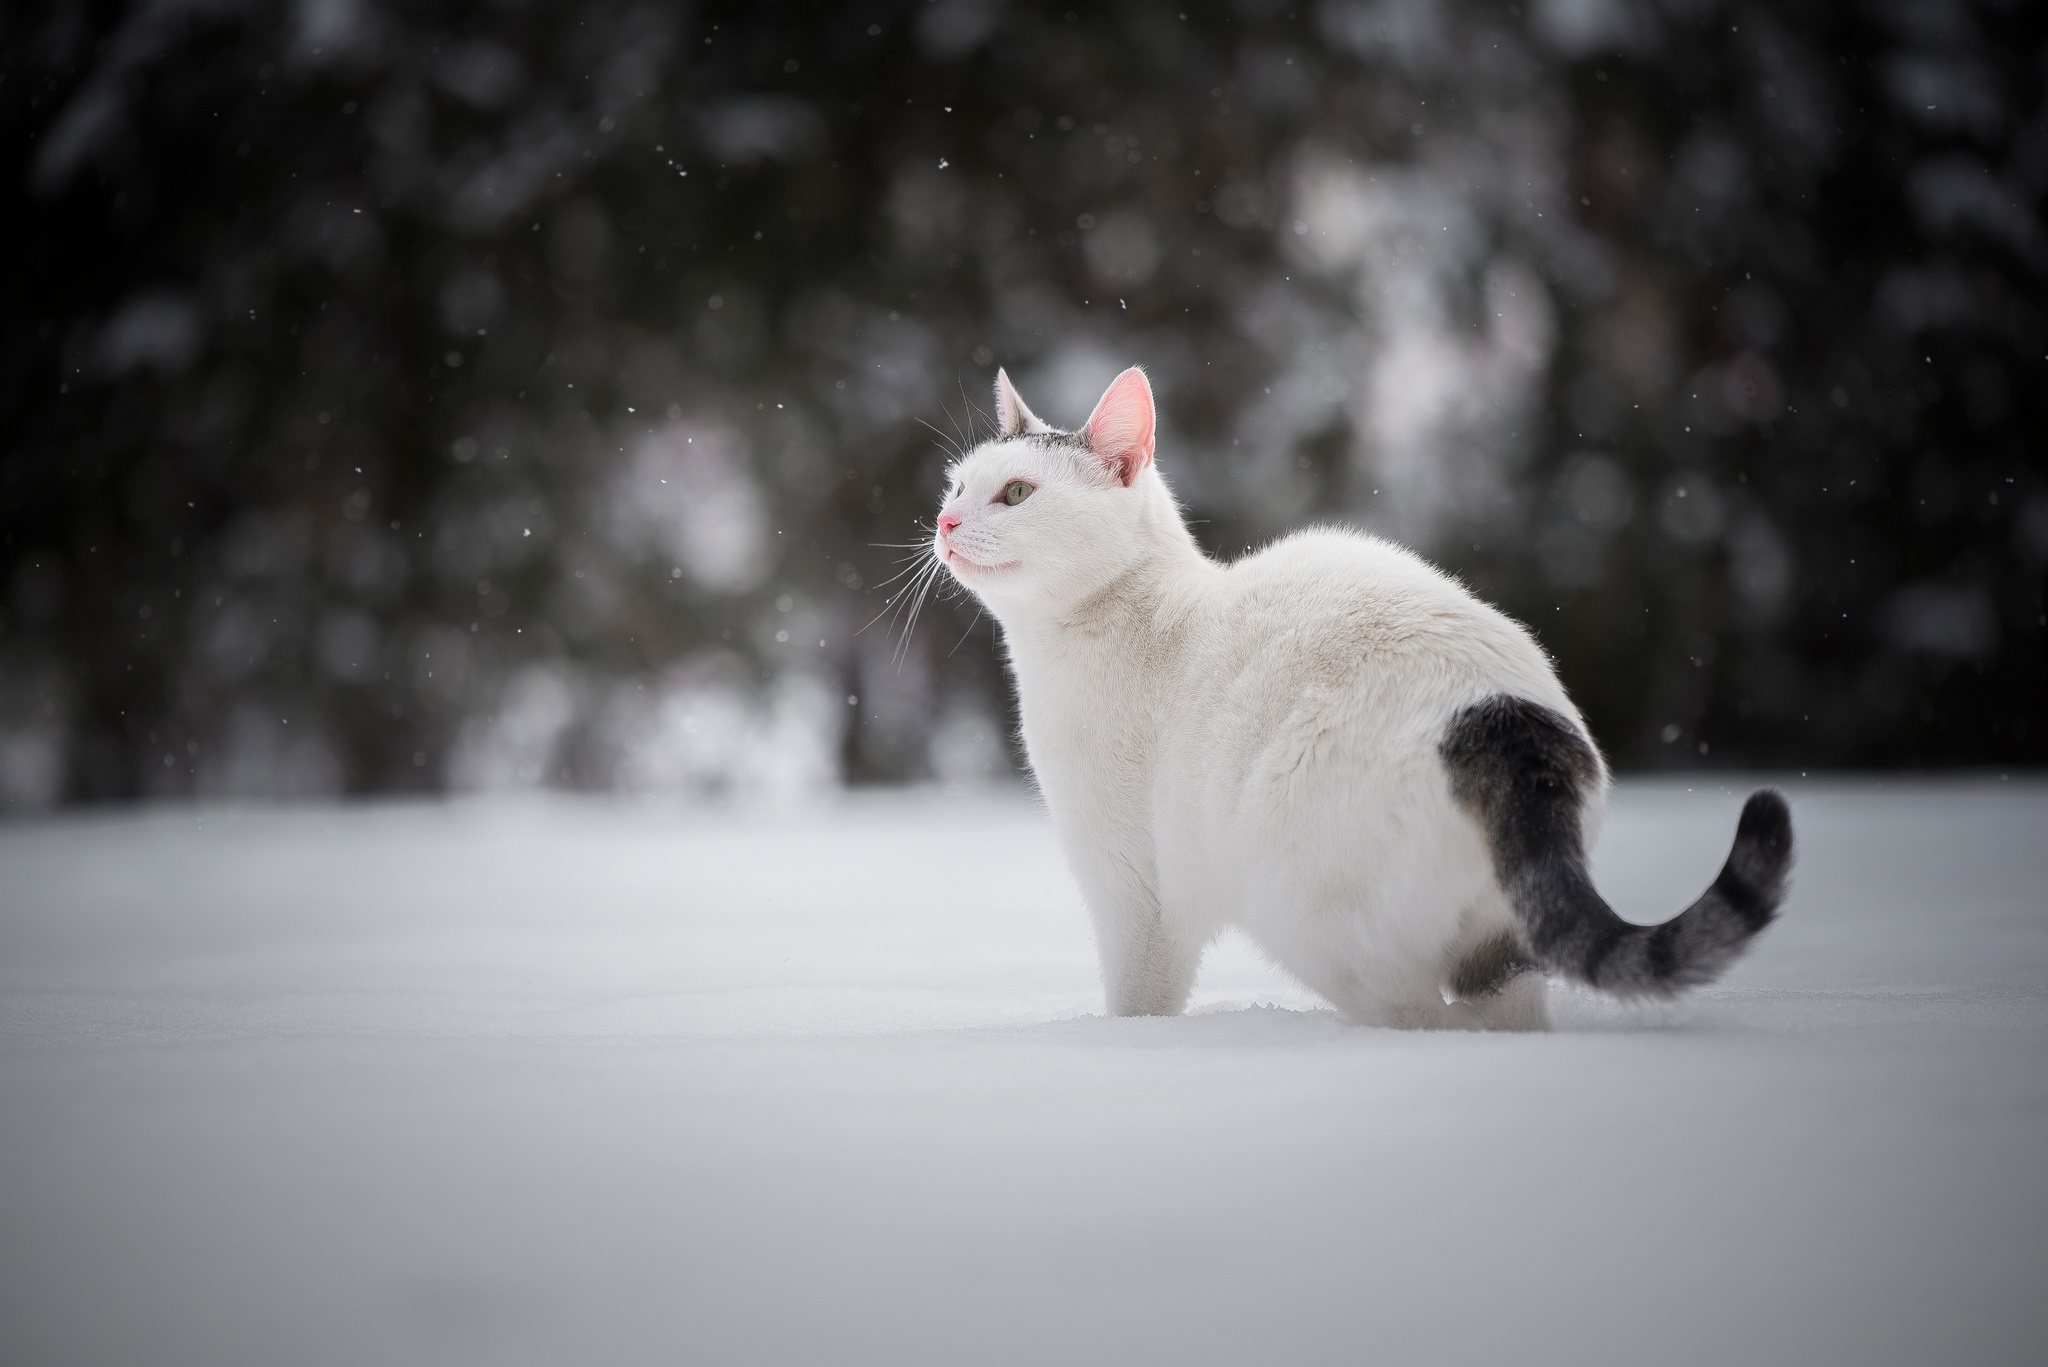 General 2048x1367 cats animals snow winter outdoors